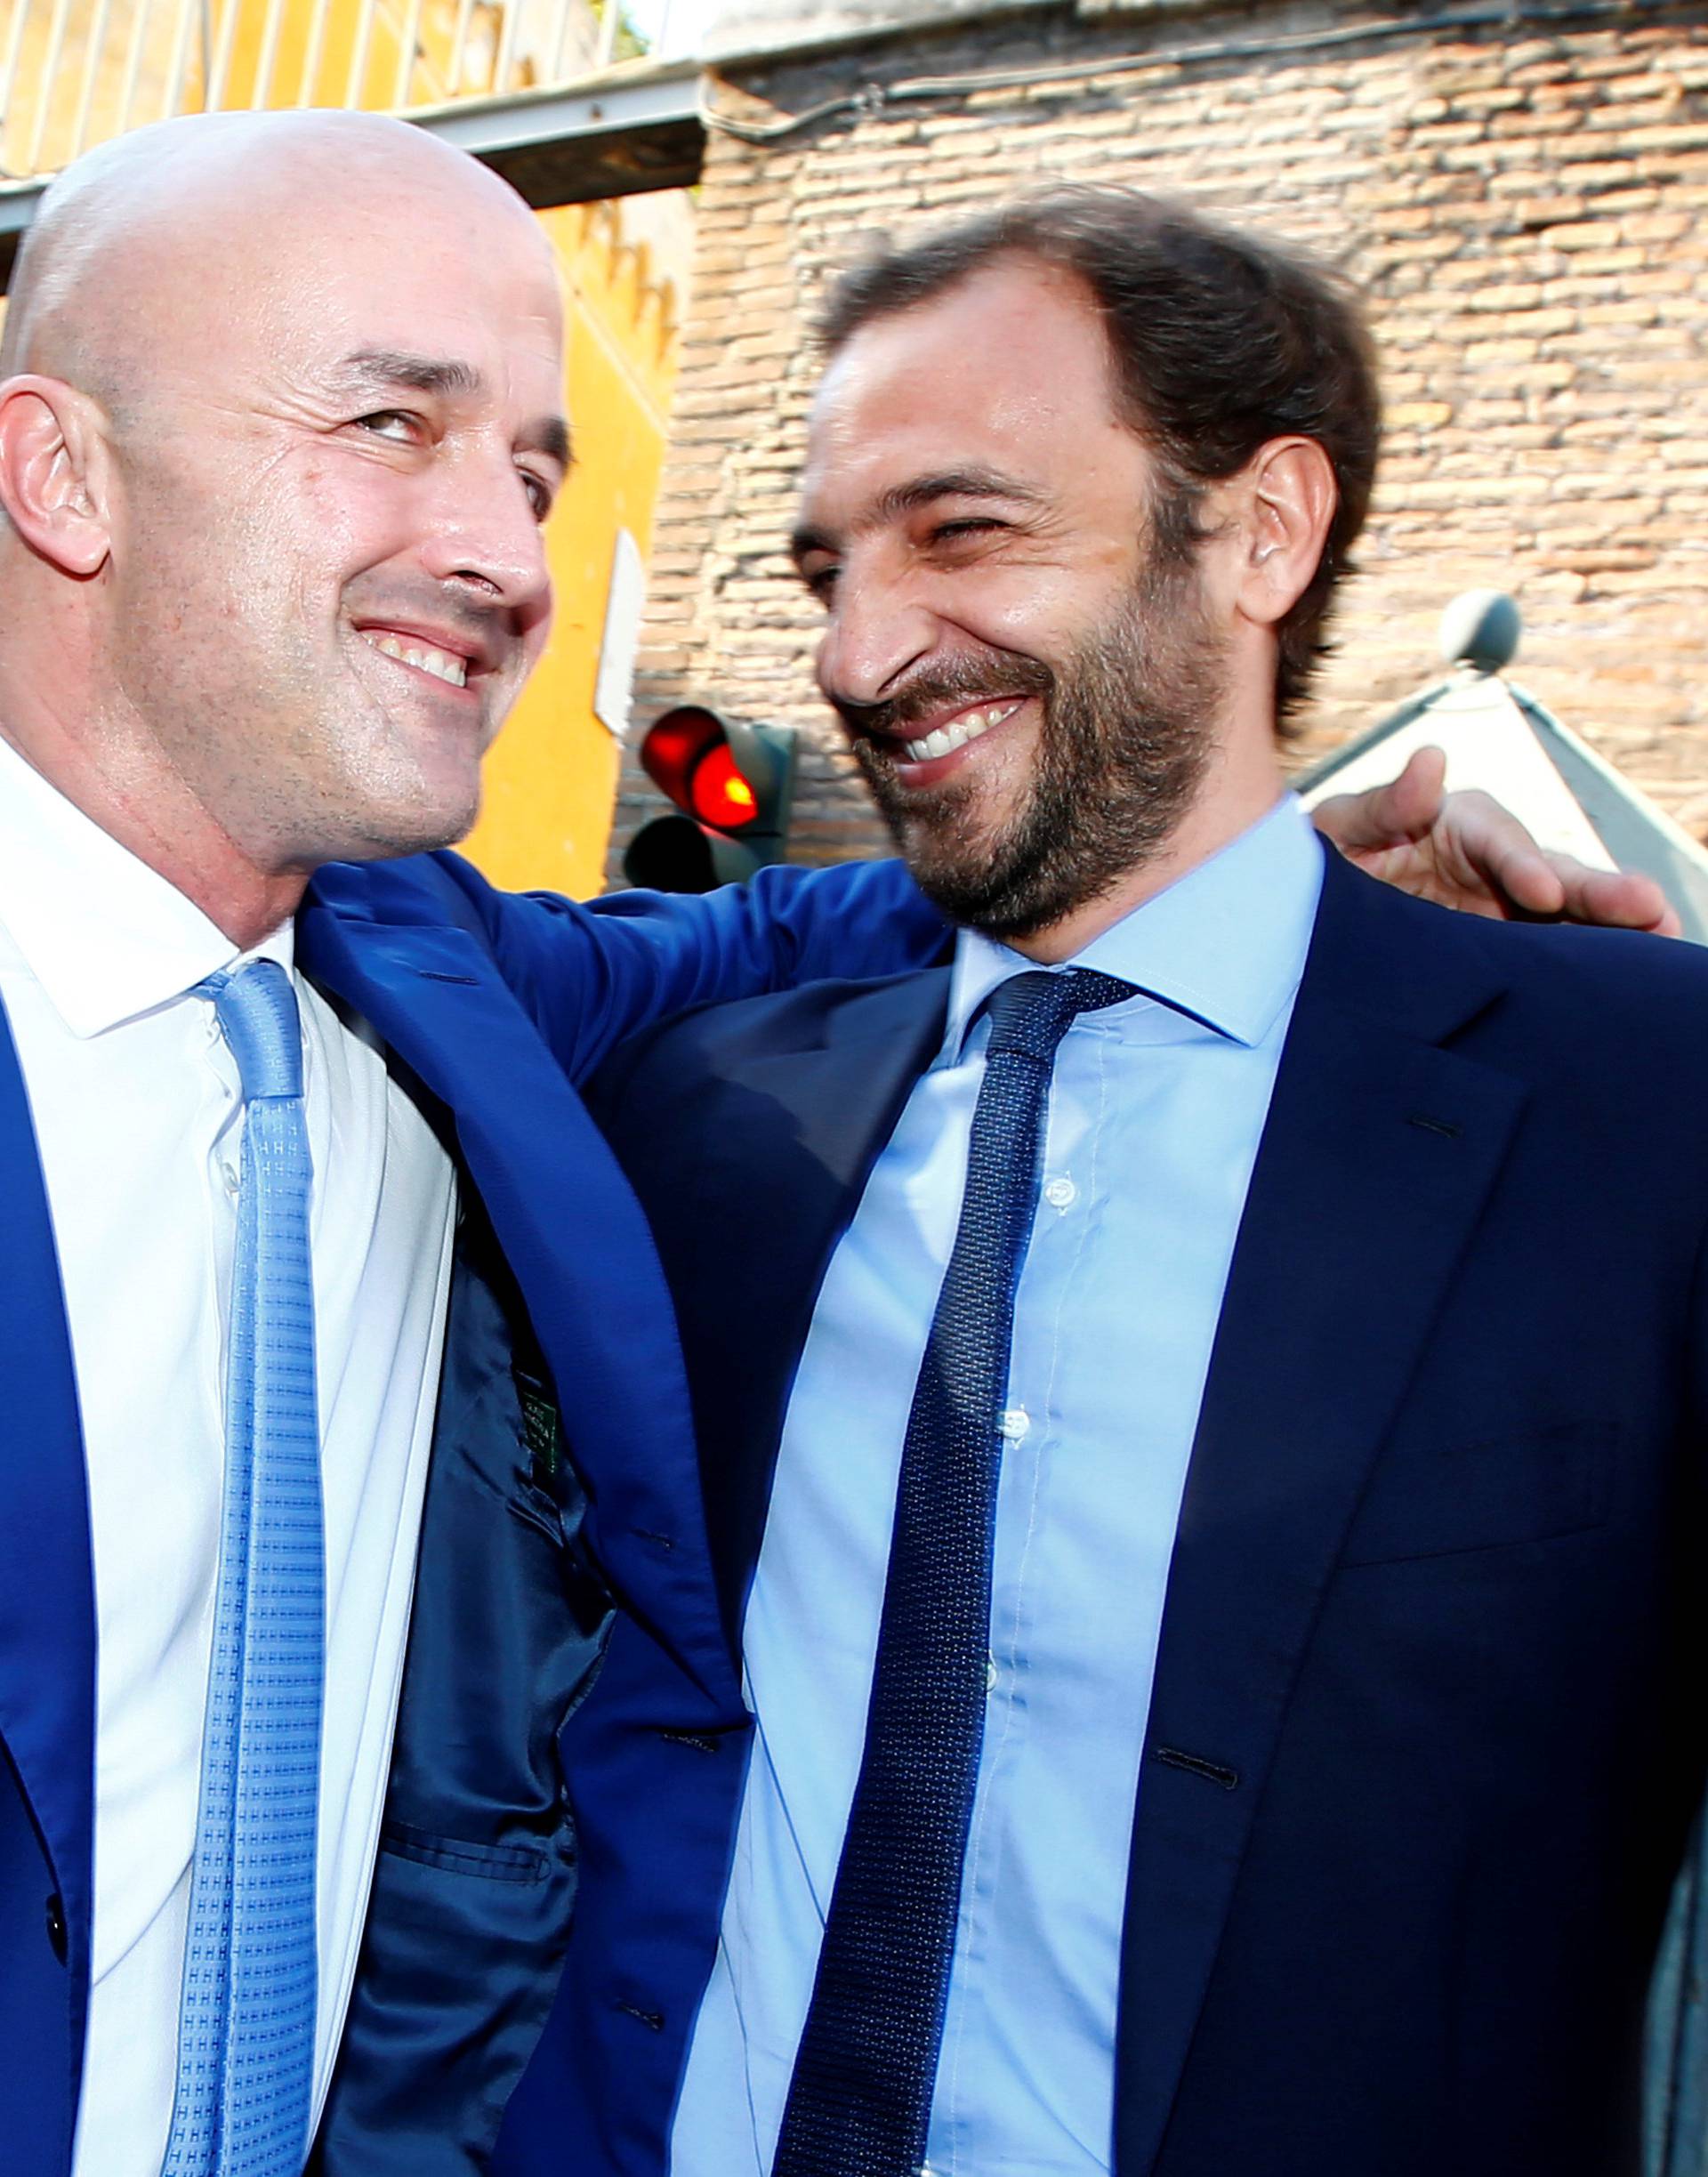 Journalists Fittipaldi and Nuzzi smile as they leave the Vatican at the end of their trial